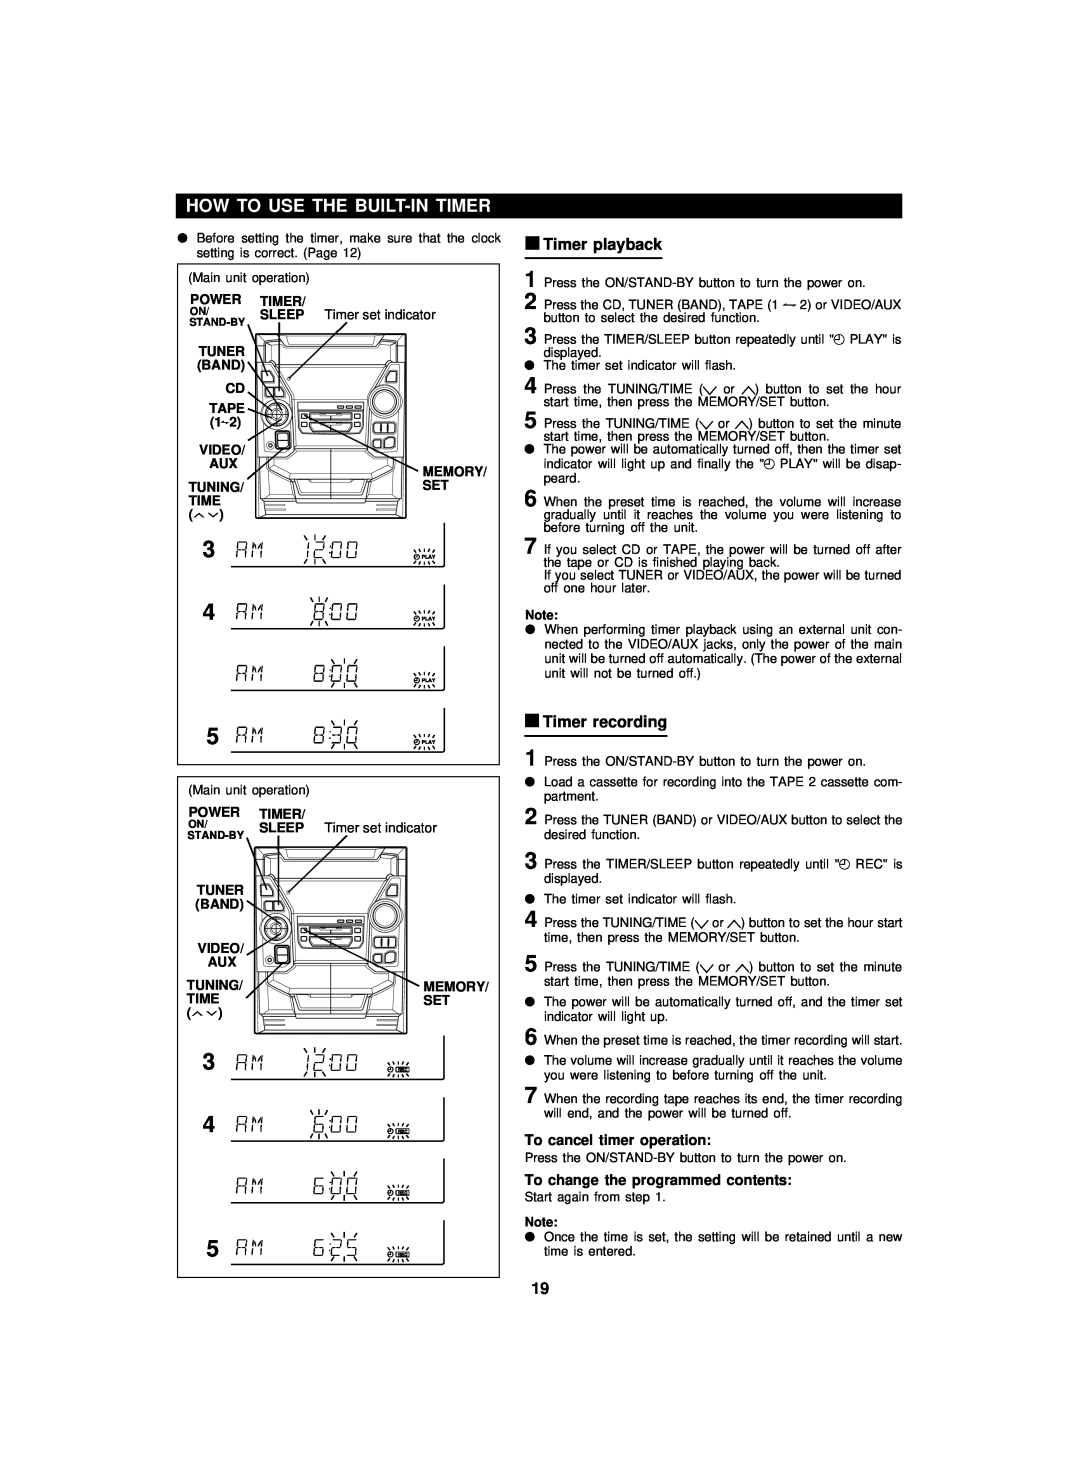 Sharp CDPC3500 operation manual How To Use The Built-Intimer, To cancel timer operation, To change the programmed contents 